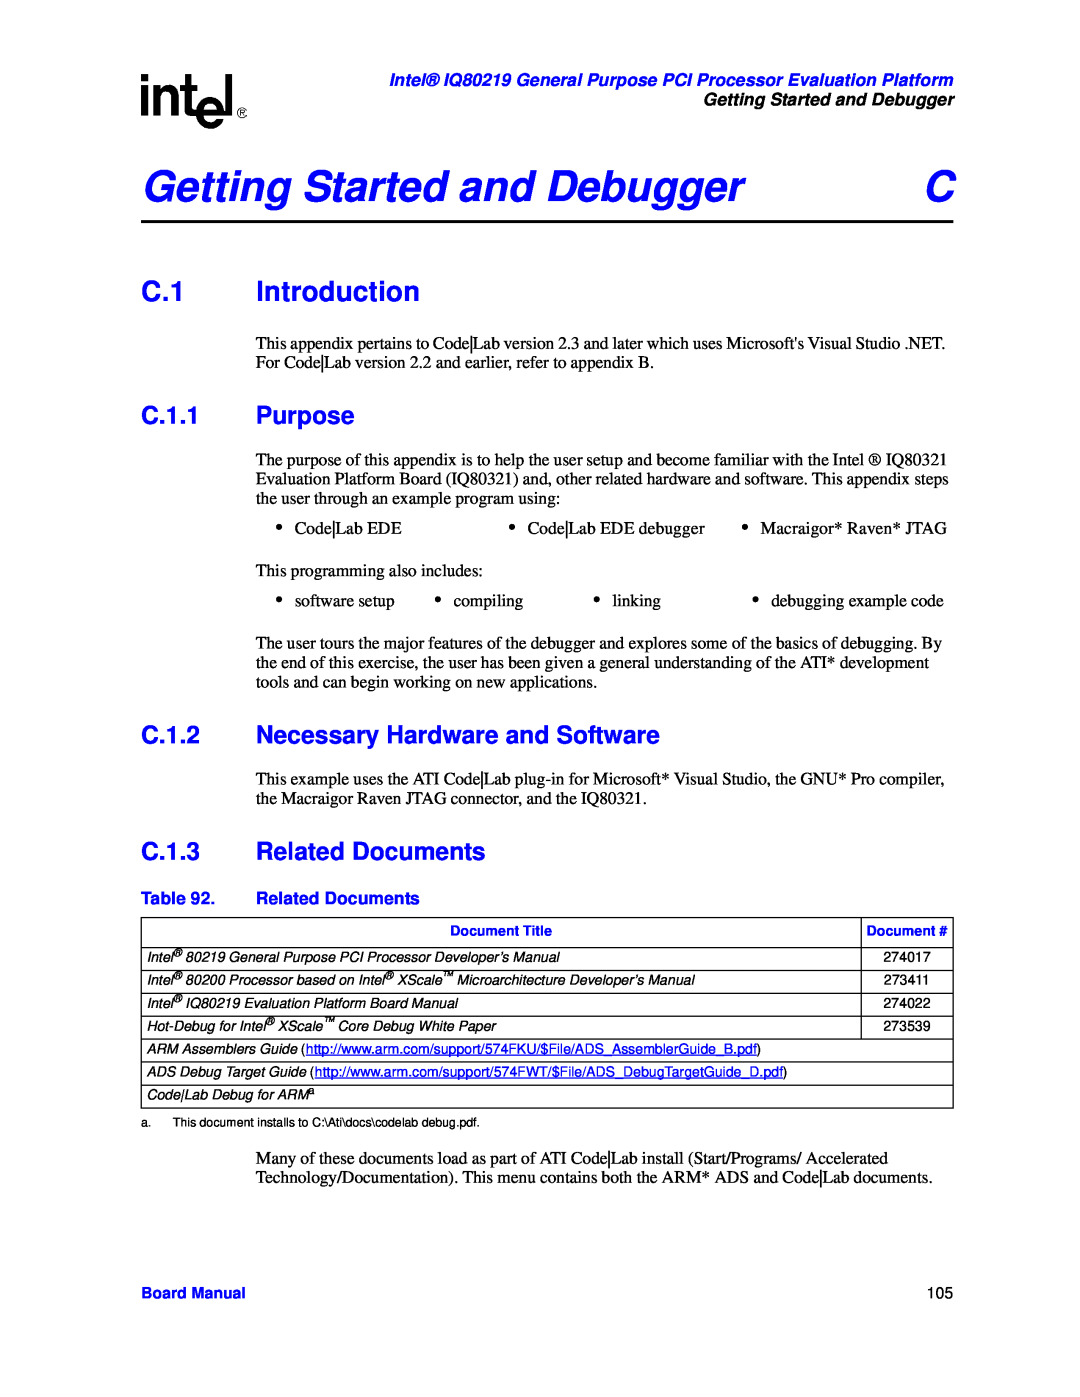 Intel IQ80219 C.1 Introduction, C.1.1 Purpose, C.1.2 Necessary Hardware and Software, C.1.3, Getting Started and Debugger 